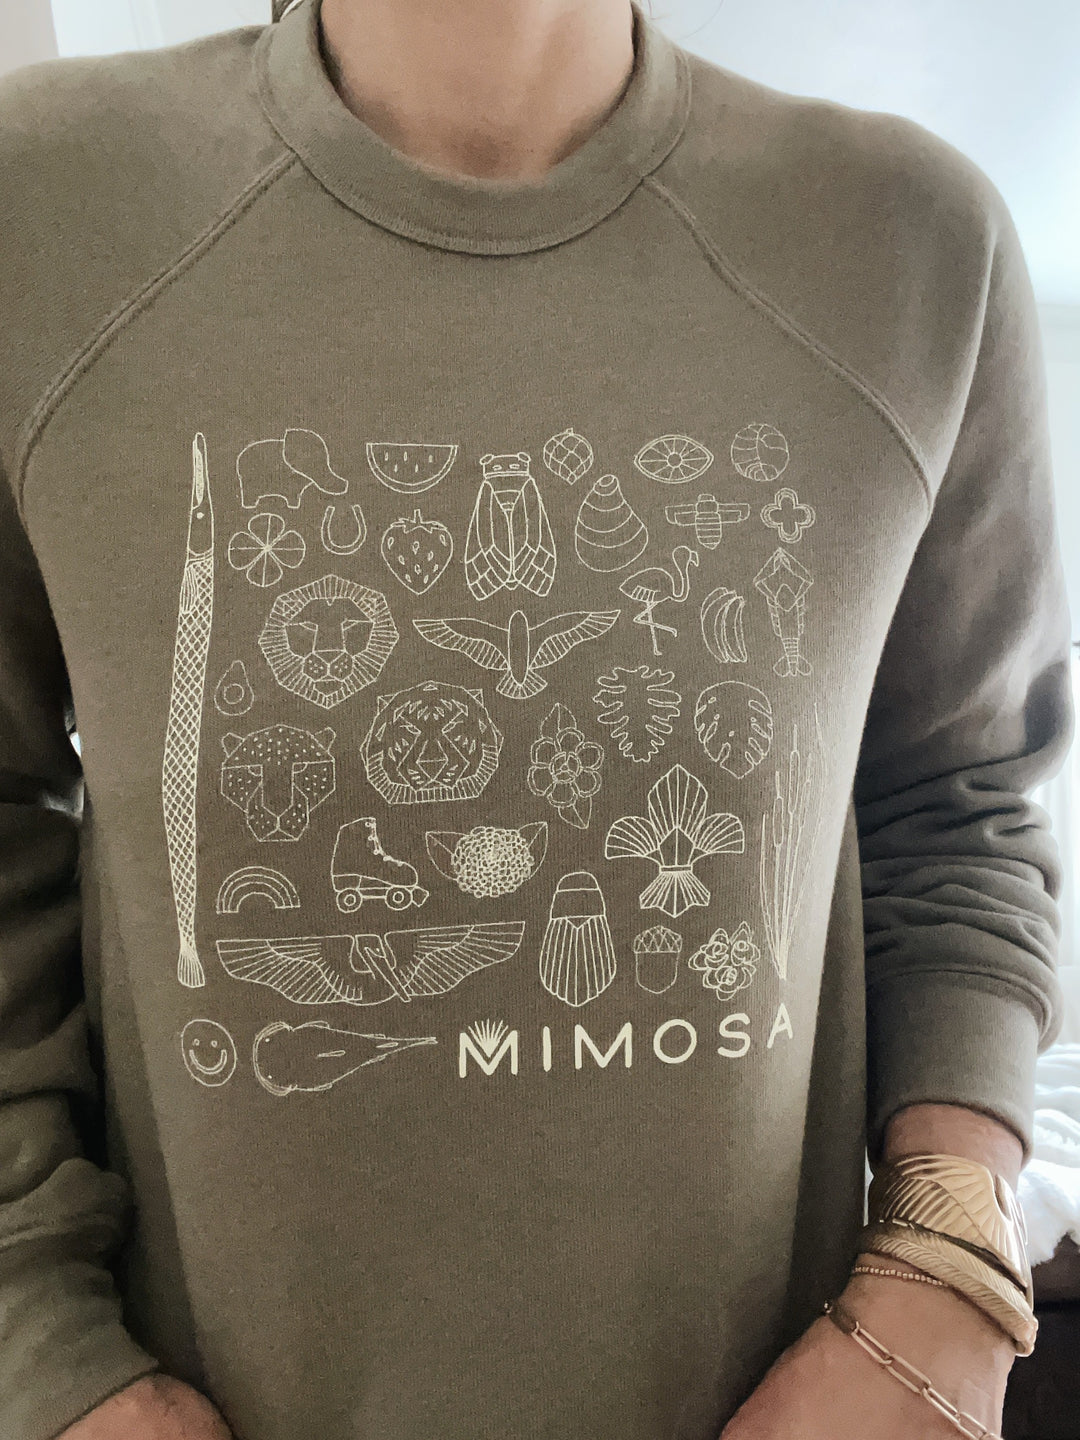 MIMOSA Handcrafted Sweatshirt Featuring Jewelry Designs